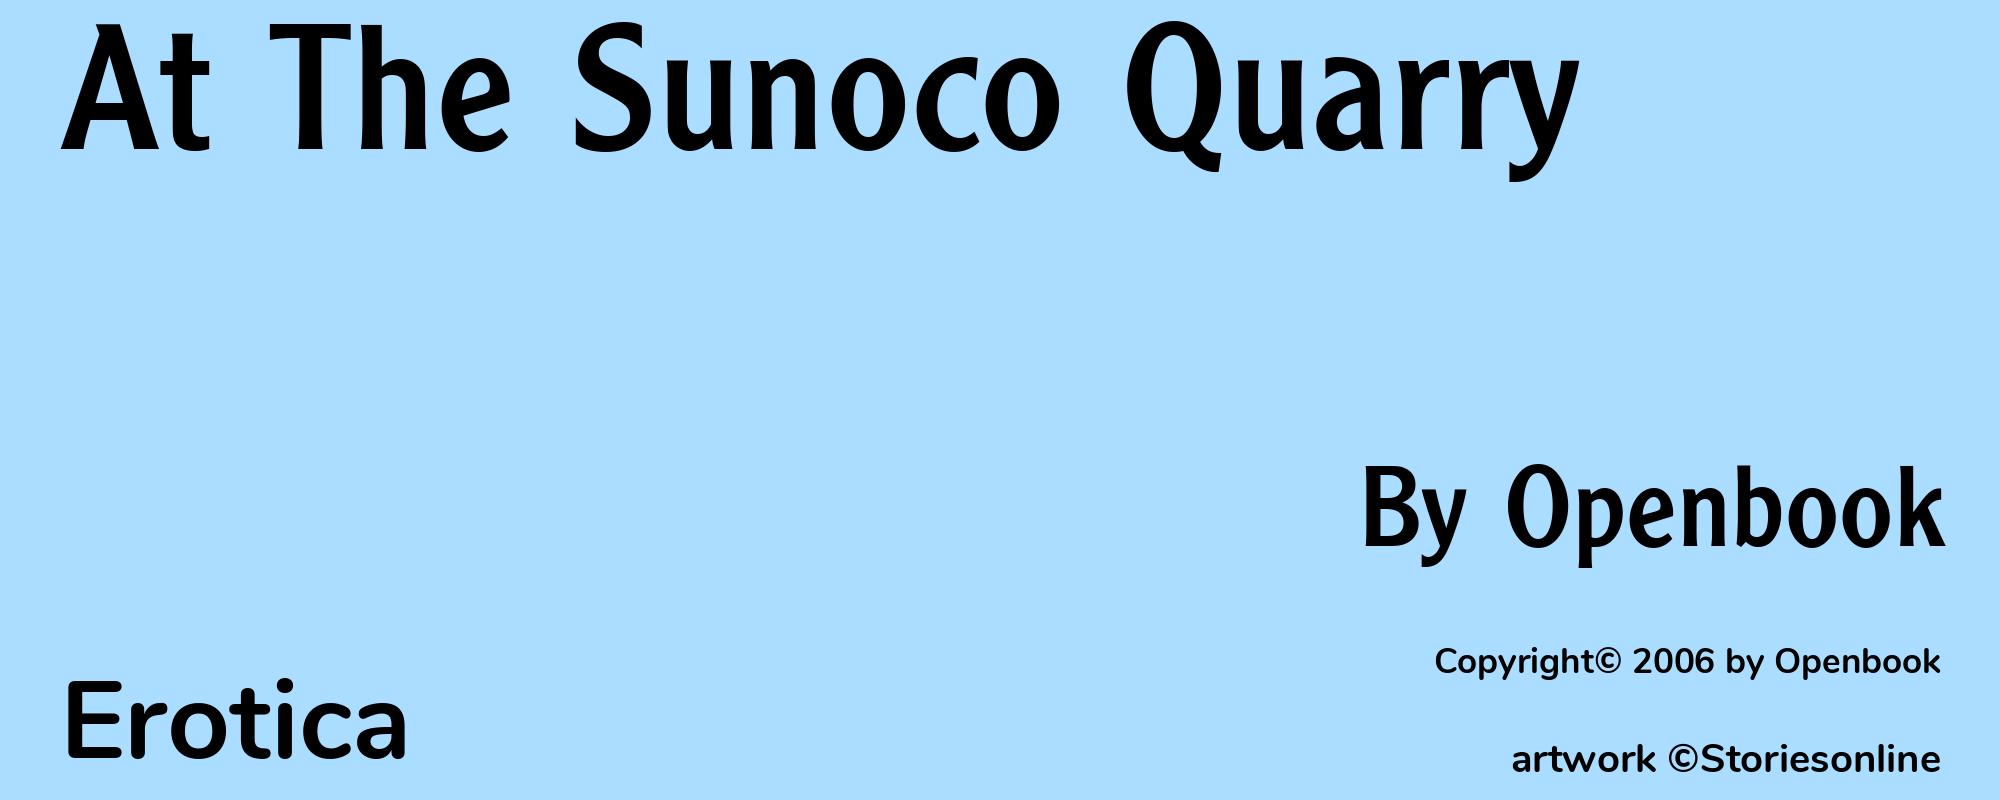 At The Sunoco Quarry - Cover